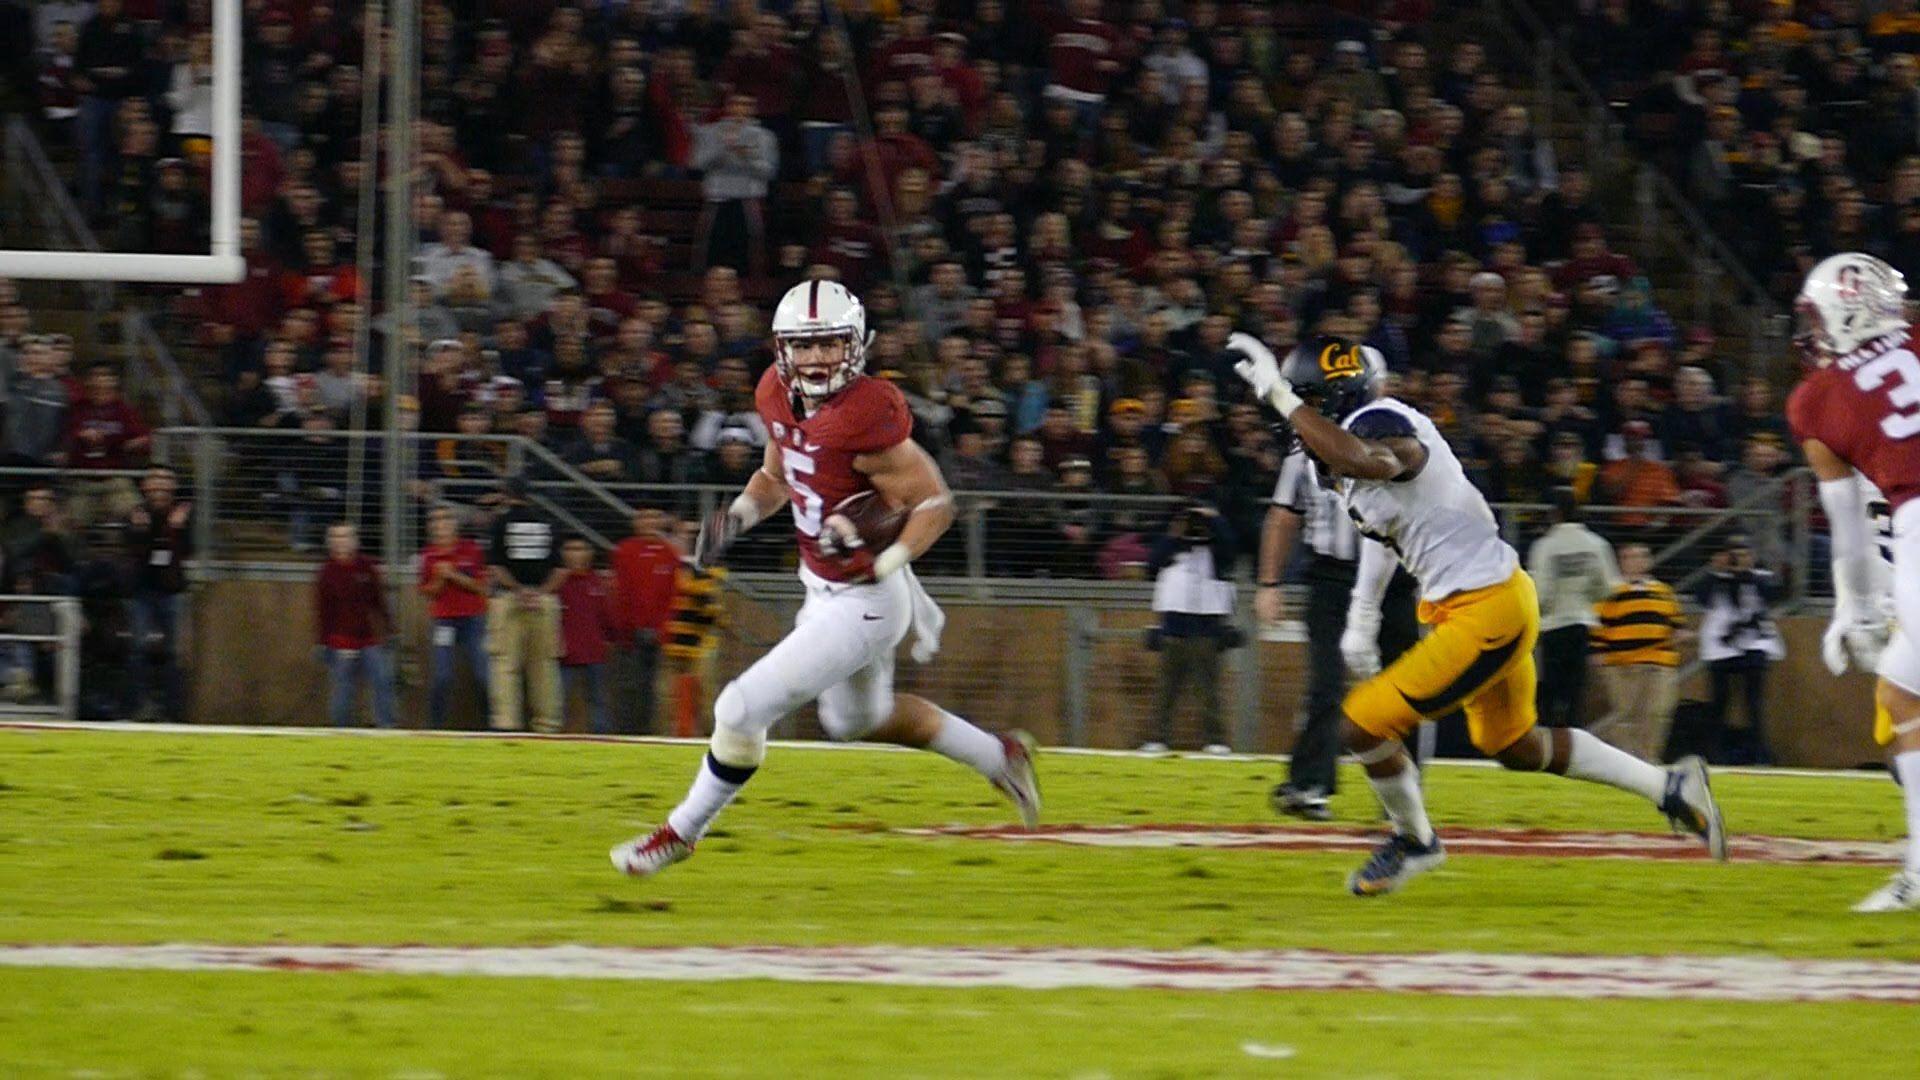 Stanford Football vs. Cal: Postgame with Christian McCaffrey